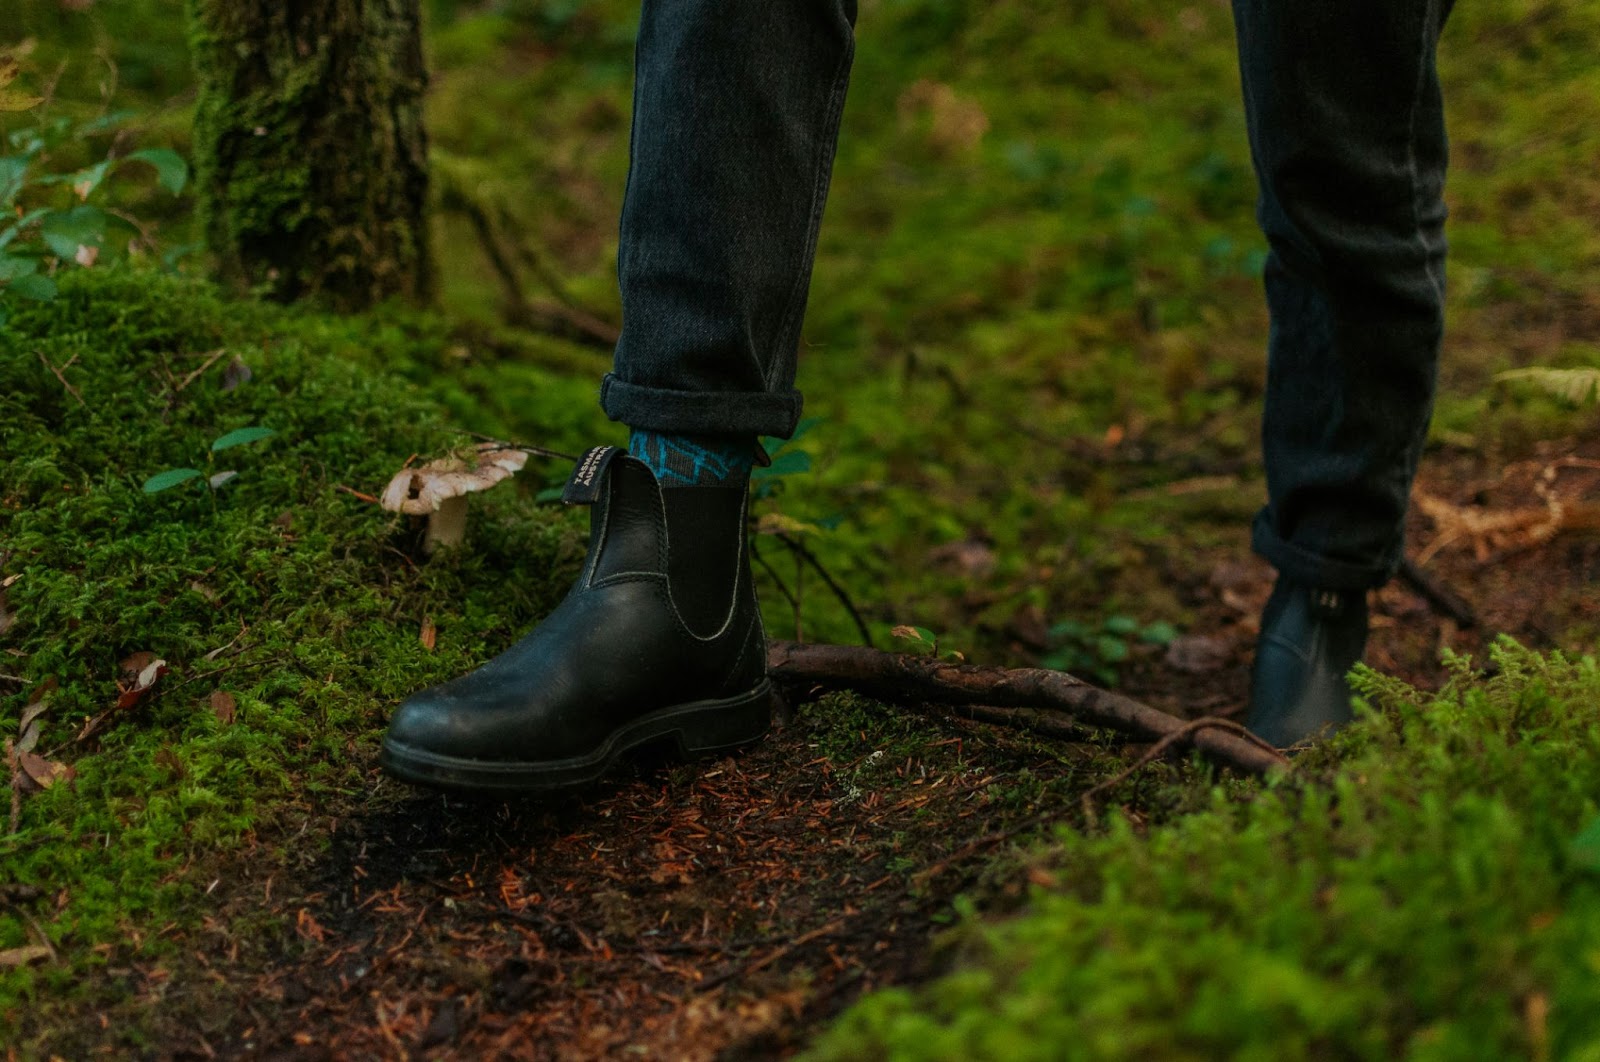 a close up of the forest floor and someone wearing boots and jeans, walking down a dirt path